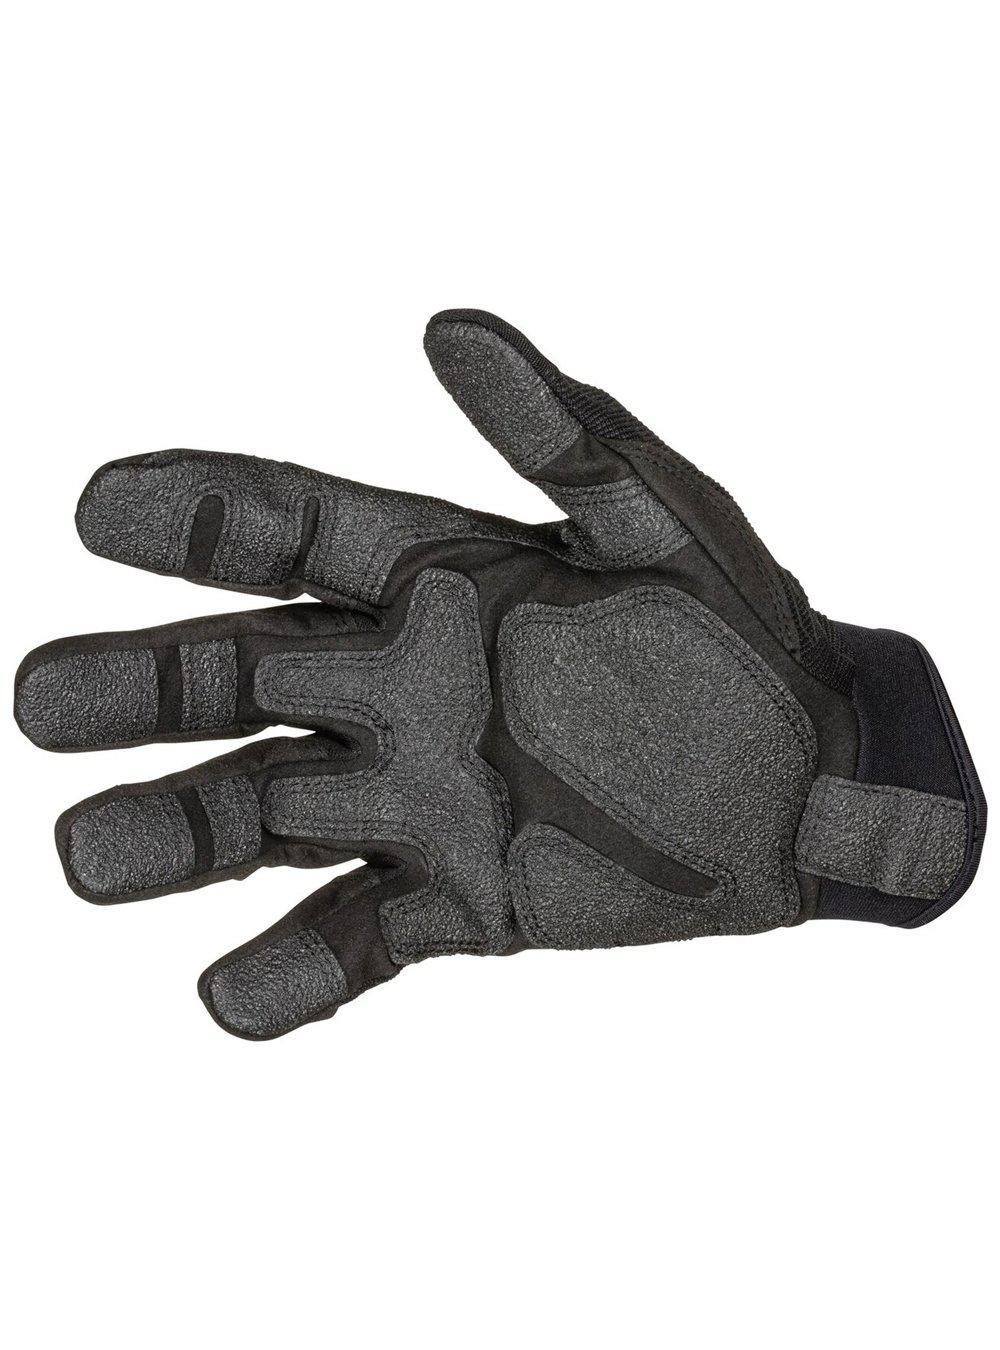 5.11 Tactical Station Grip 2 Gloves - TacSource